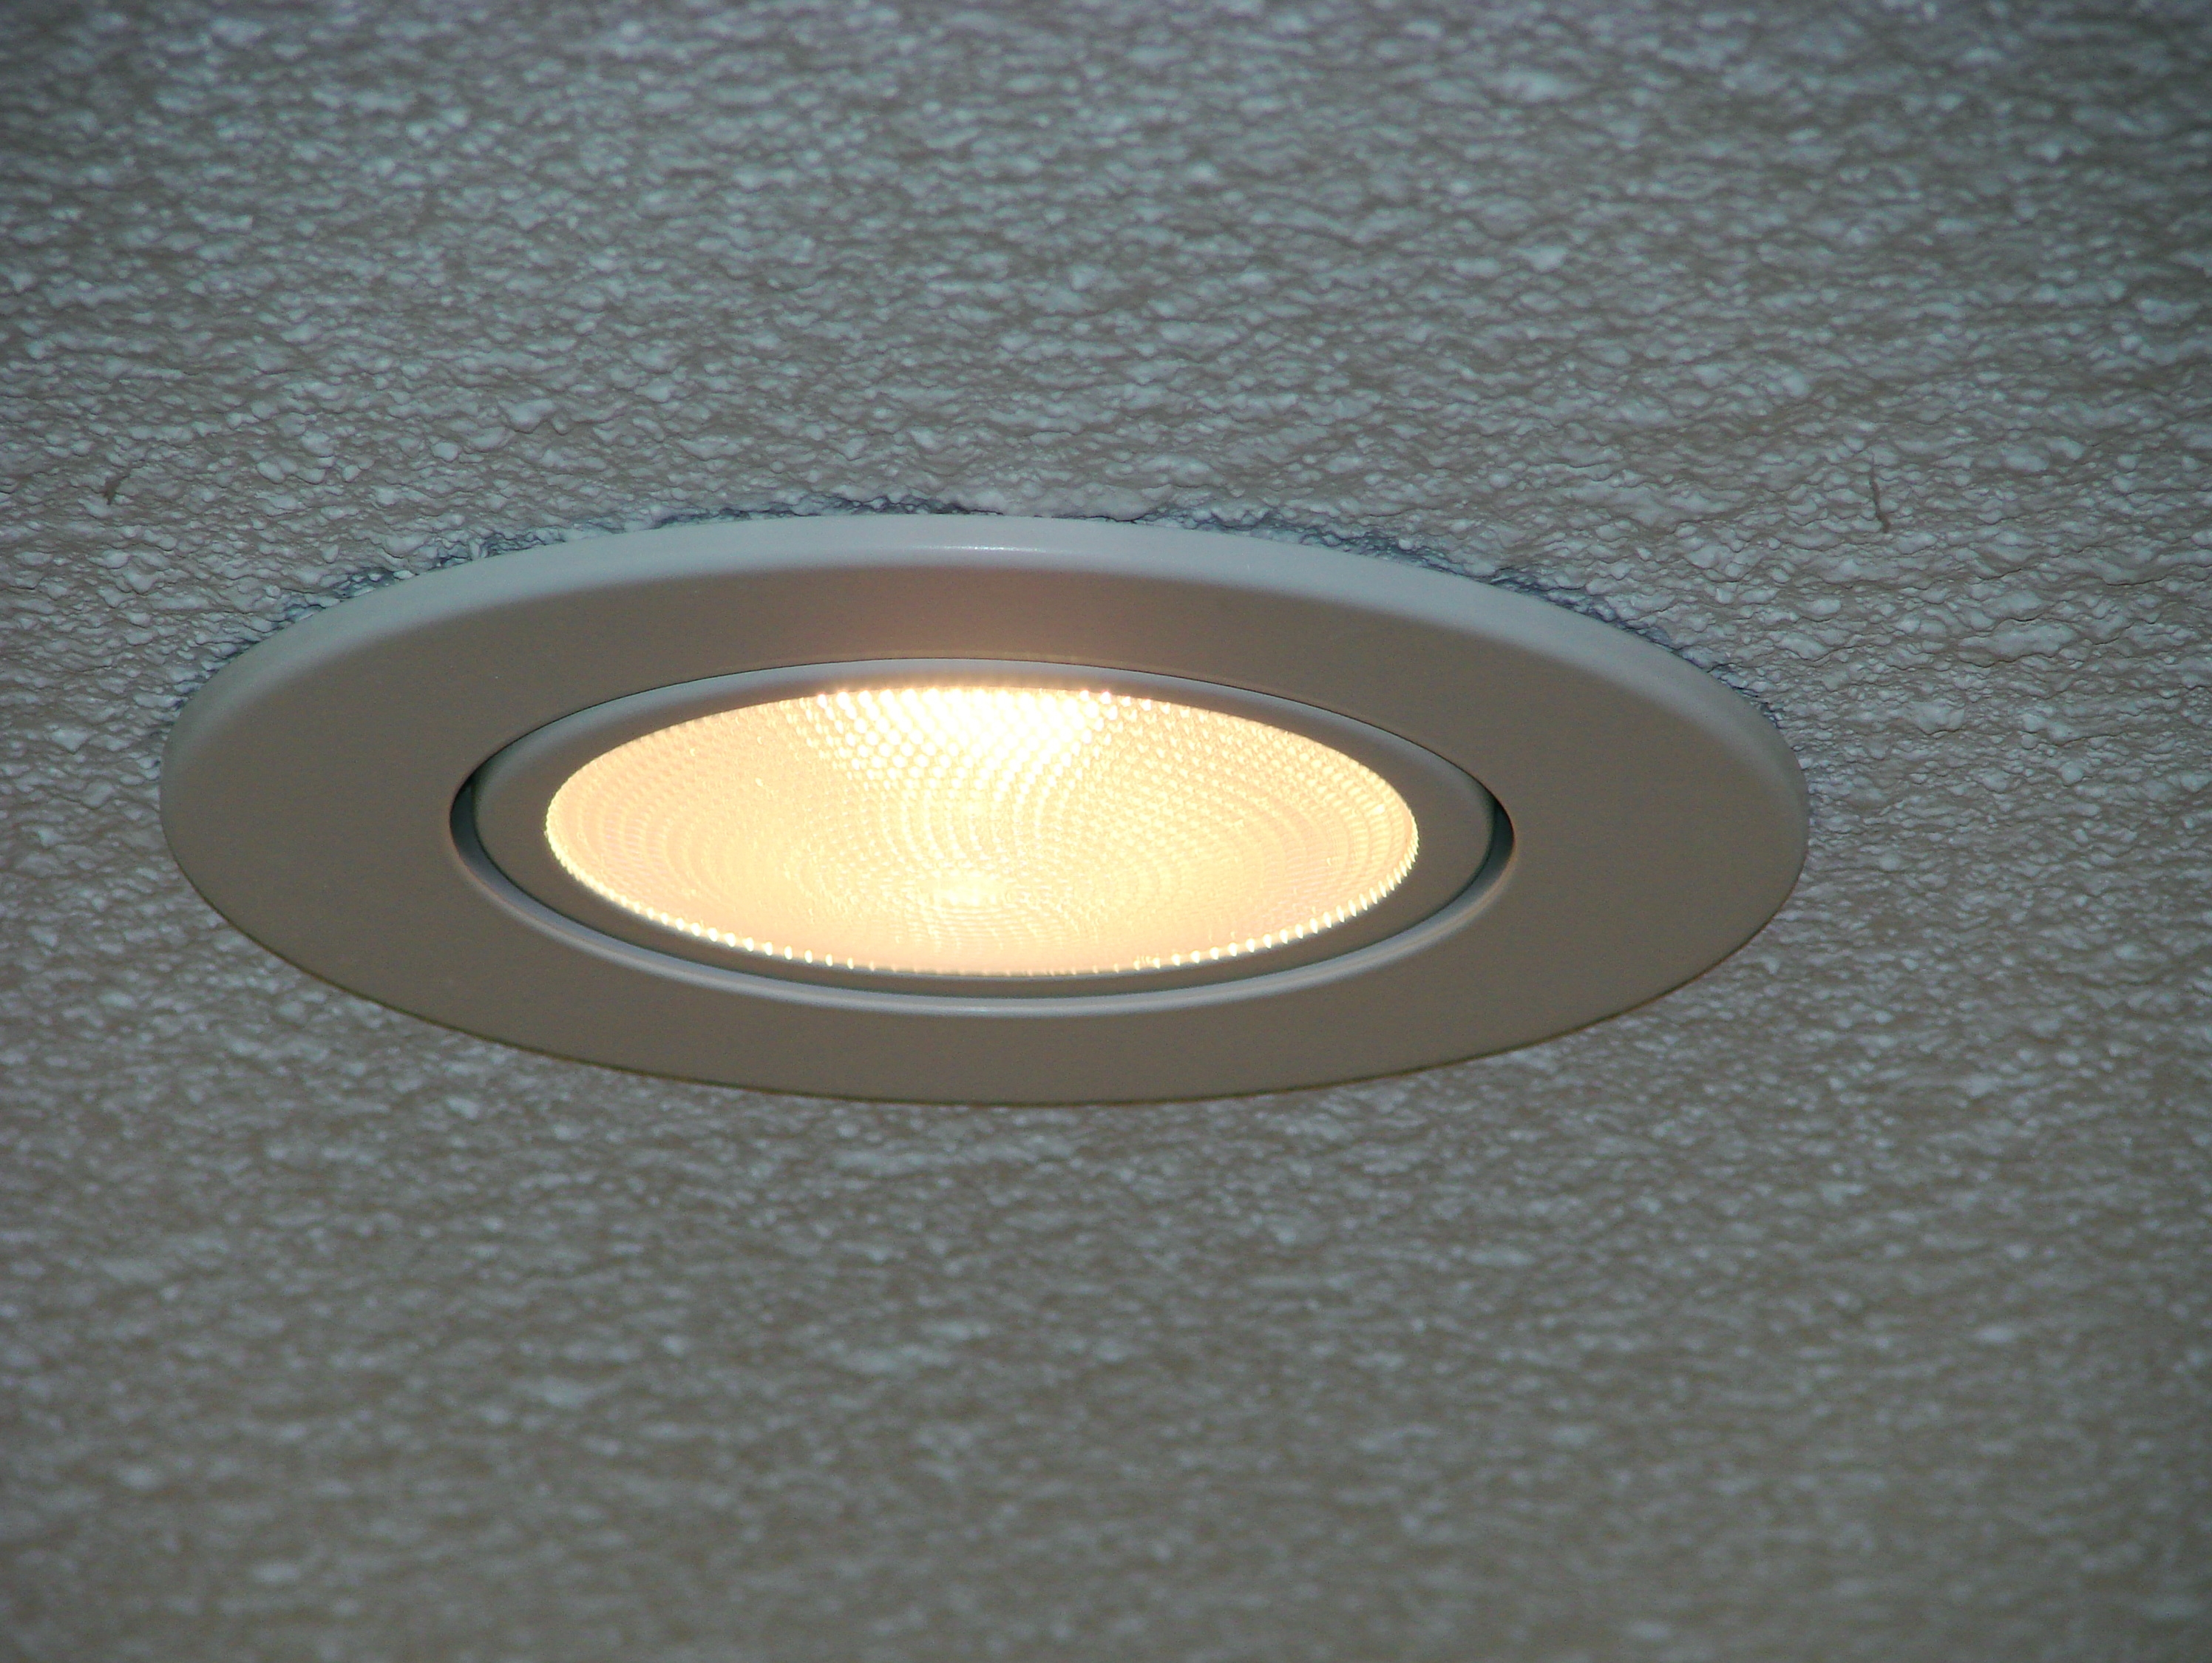 Light Covers For Recessed Ceiling Lights2992 X 2249